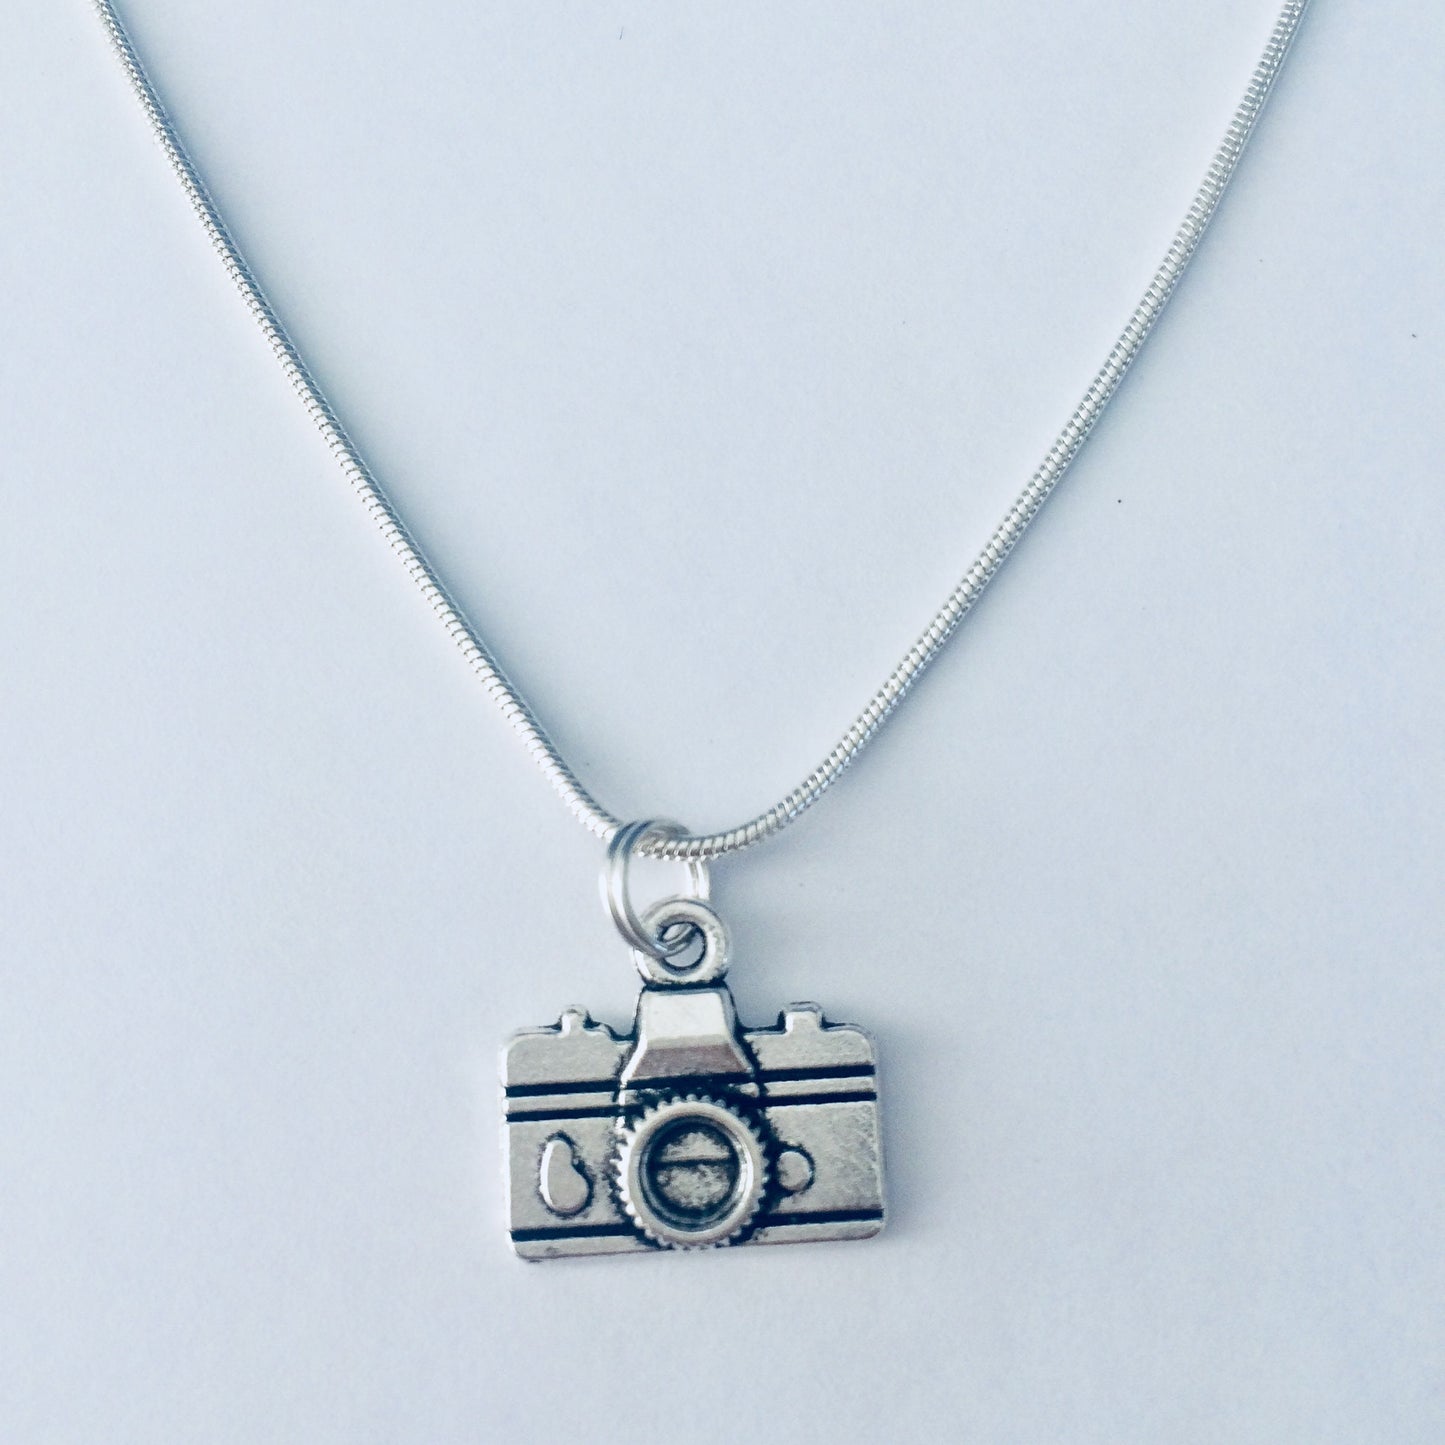 Camera Necklace, Photography Lover, Photographer Jewelry, Photographer Jewellery, Wedding Photographer Gift, Travel Jewellery, Camera